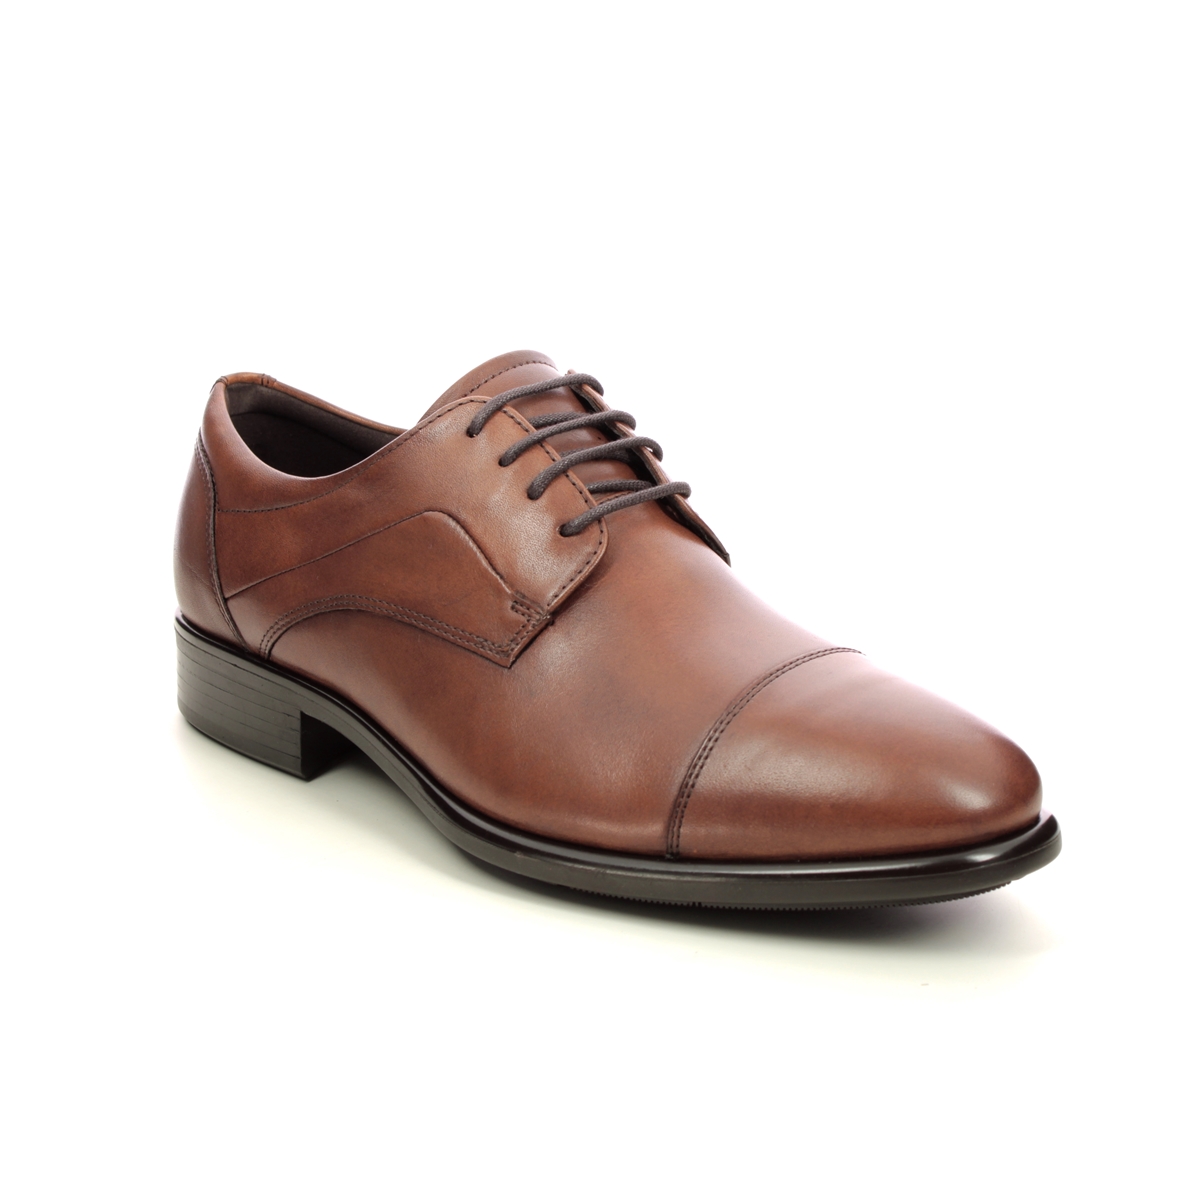 Lagring barm Tolk ECCO Citytray Mens Tan Leather formal shoes